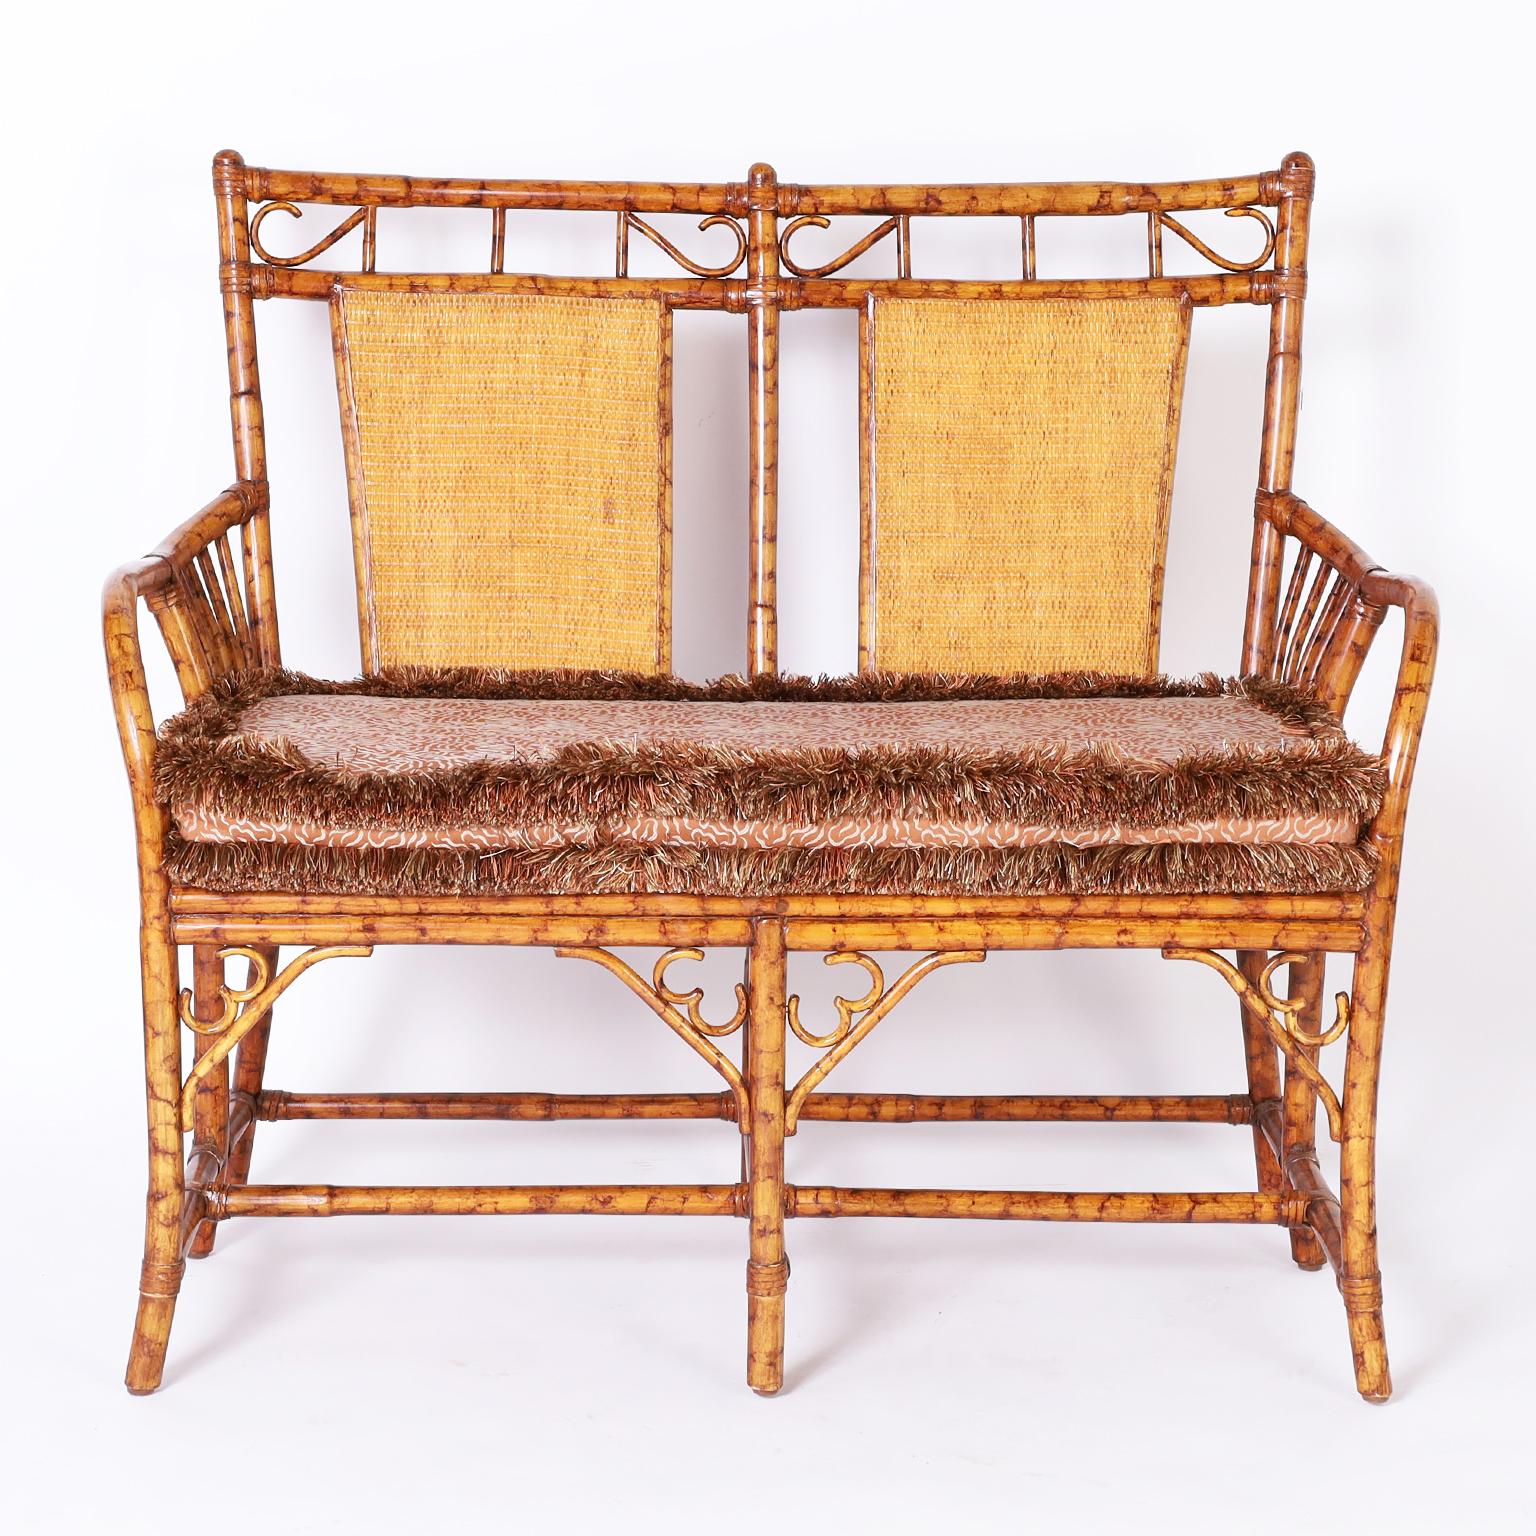 Mid century faux bamboo loveseat or settee featuring two wicker paneled backs, bentwood arms, caned seat under an eccentric cushion, and eight legs with cross stretchers.